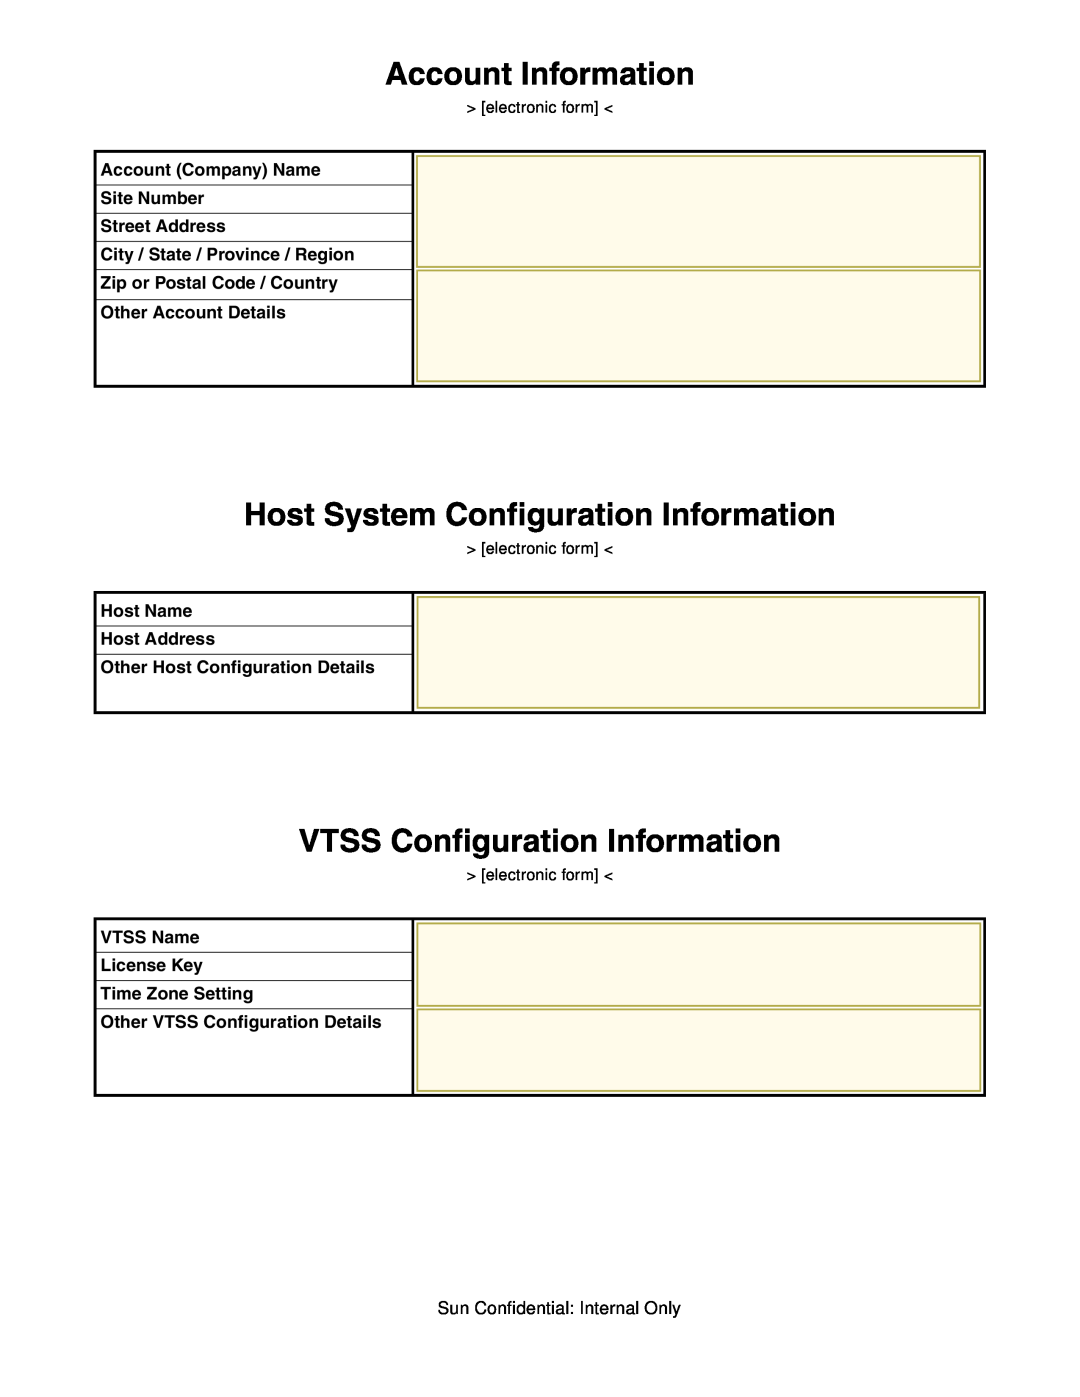 Sun Microsystems 96257 manual Account Information, Host System Configuration Information, VTSS Configuration Information 